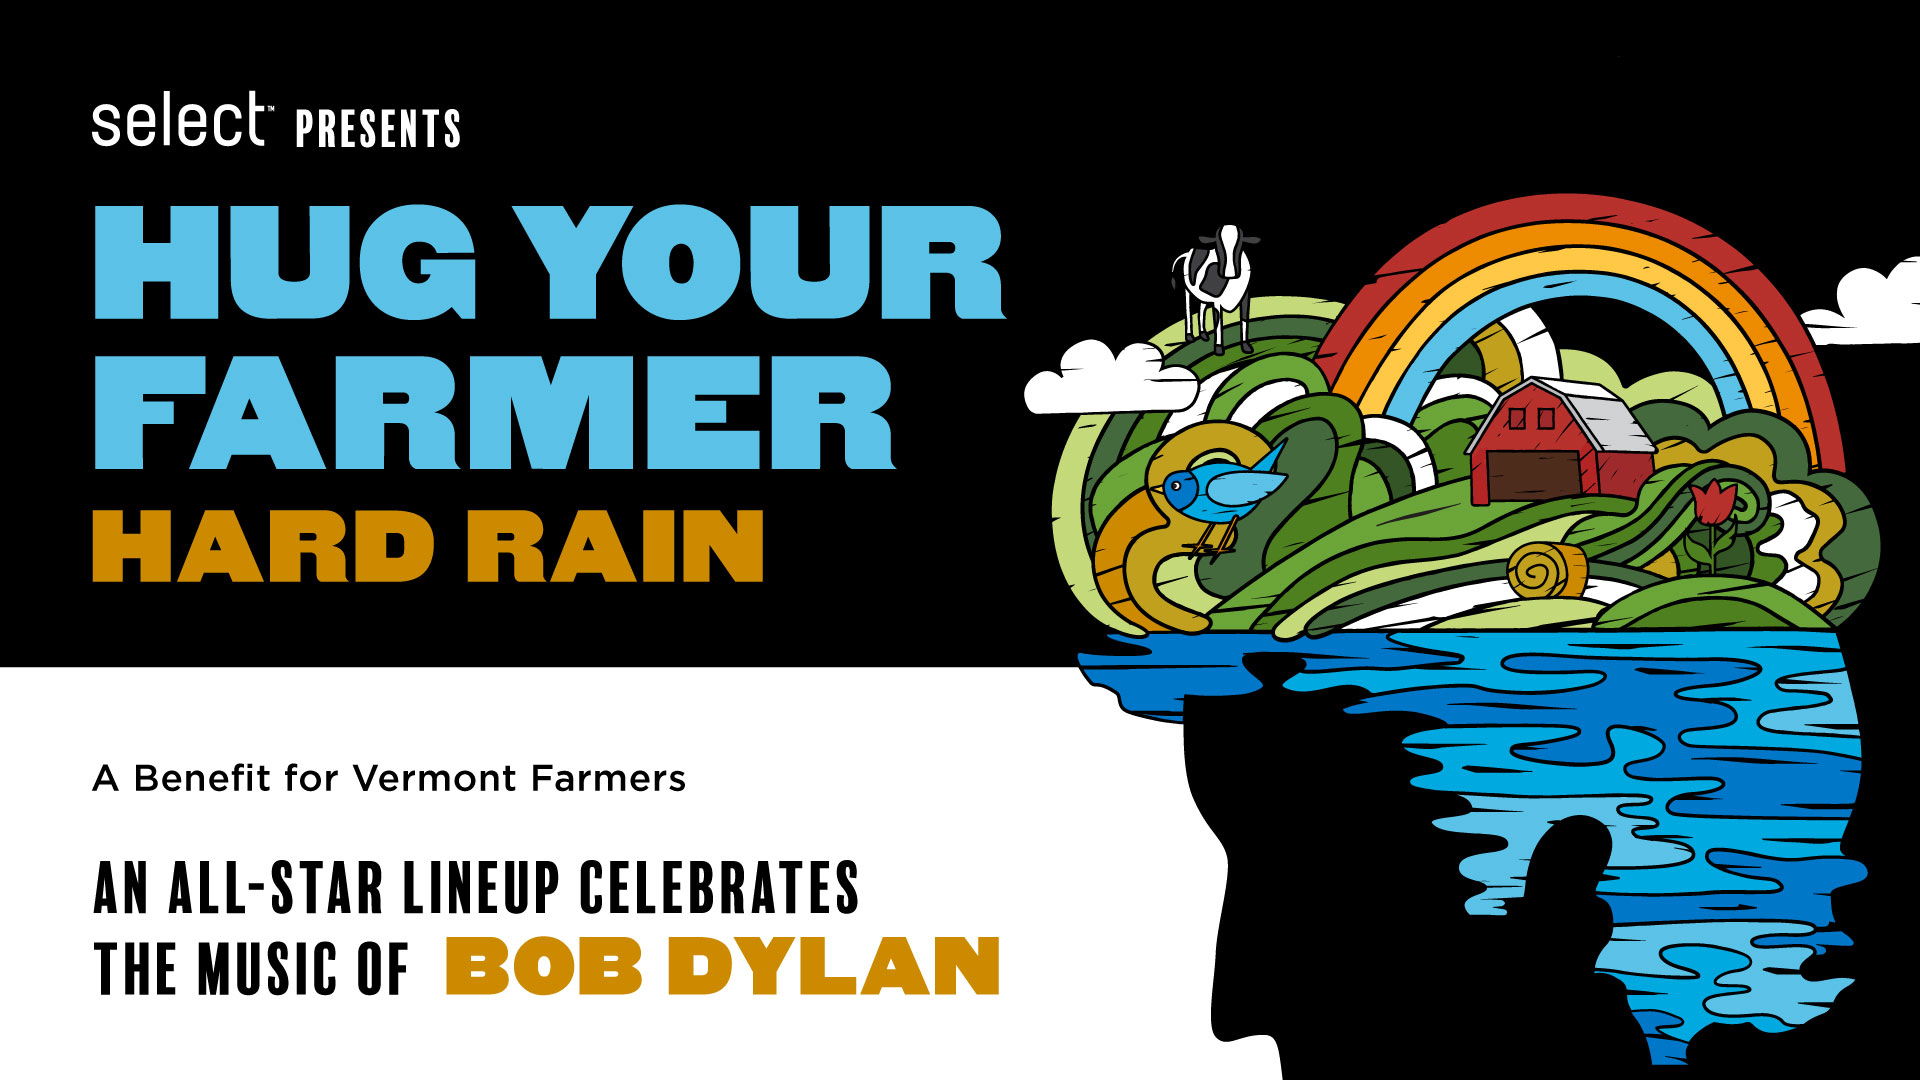 An illustrated head with waves and farm illustrations. Text on the left side reads Select presents Hug Your Farmer Hard Rain. A Benefit For Vermont Farmers. An All-Star Lineup Celebrates The Music of Bob Dylan.